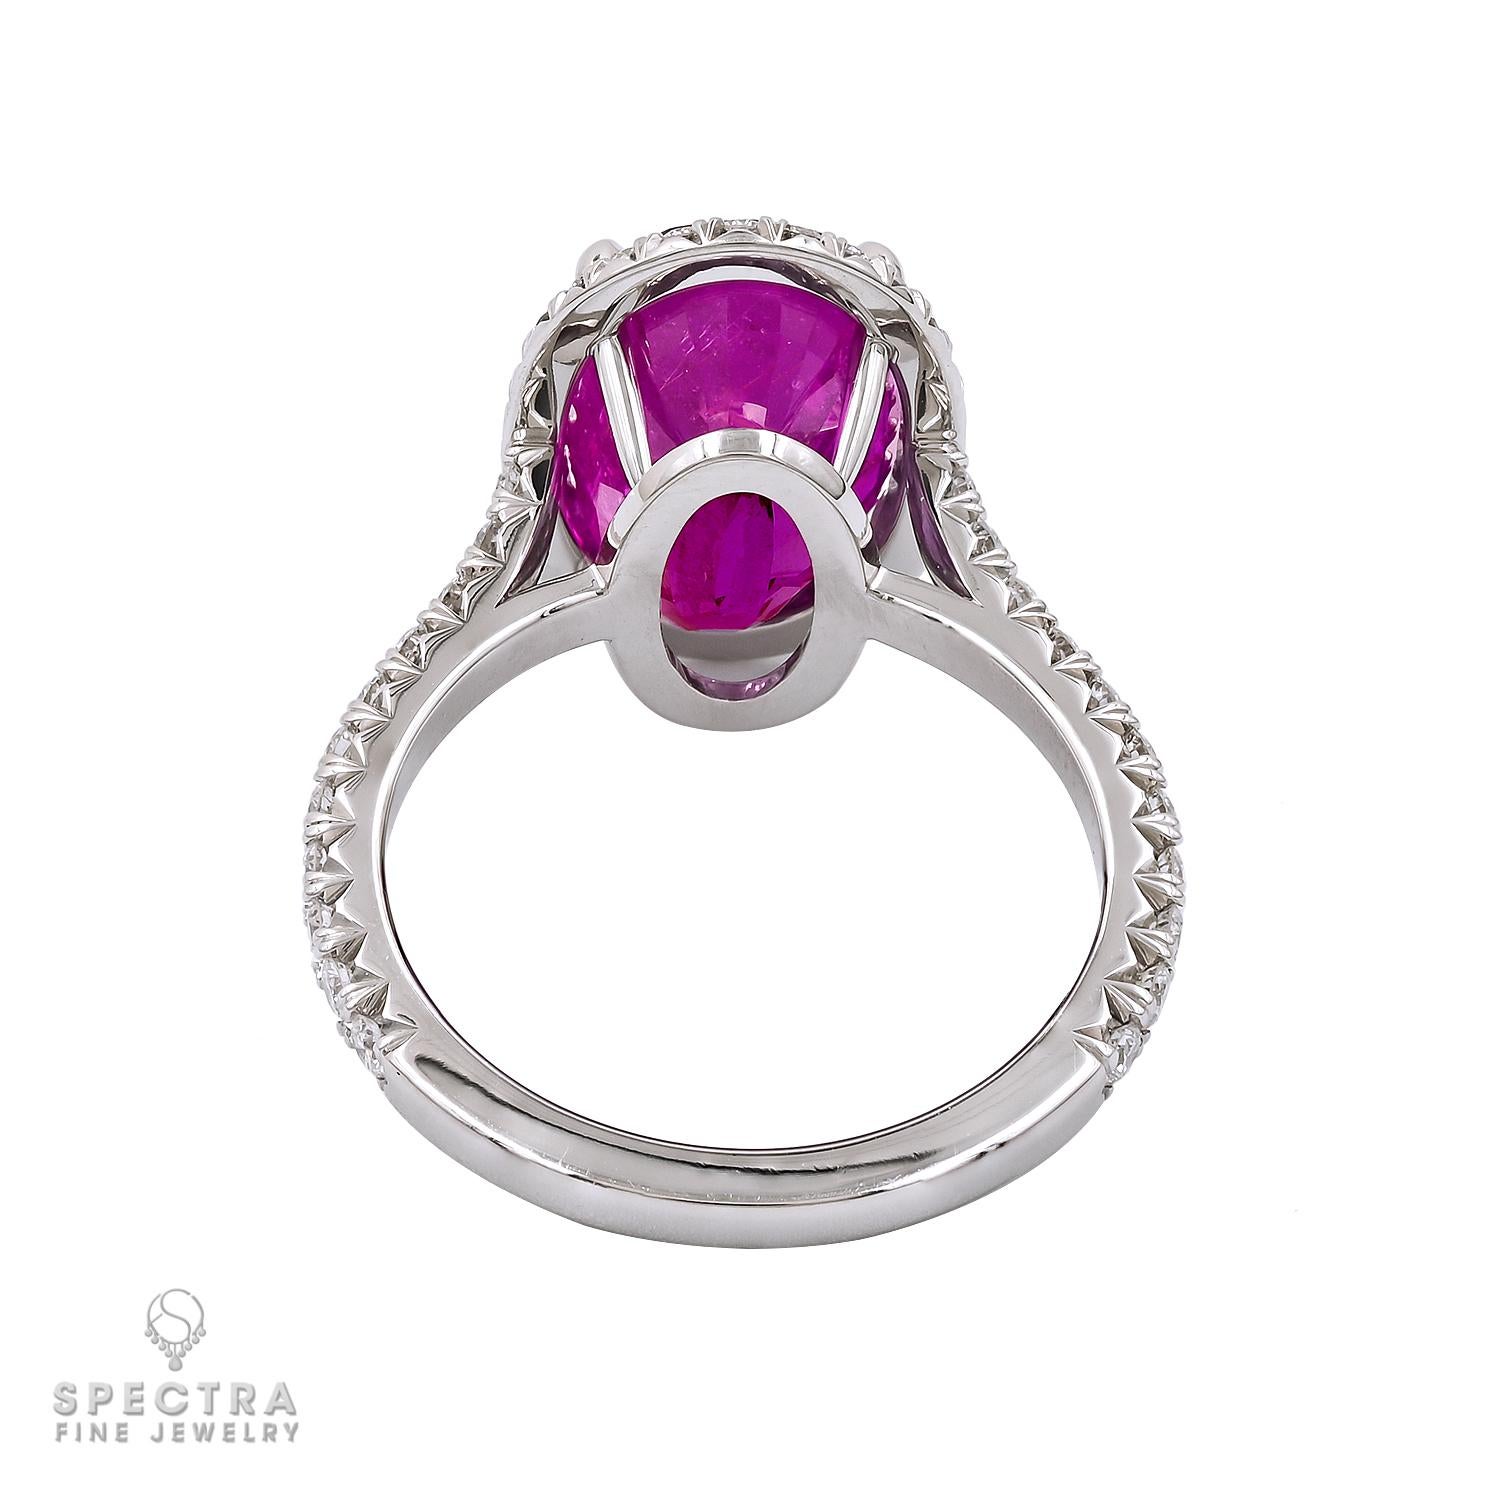 Contemporary Spectra Fine Jewelry Madagascar Pink Sapphire Diamond Halo Ring For Sale